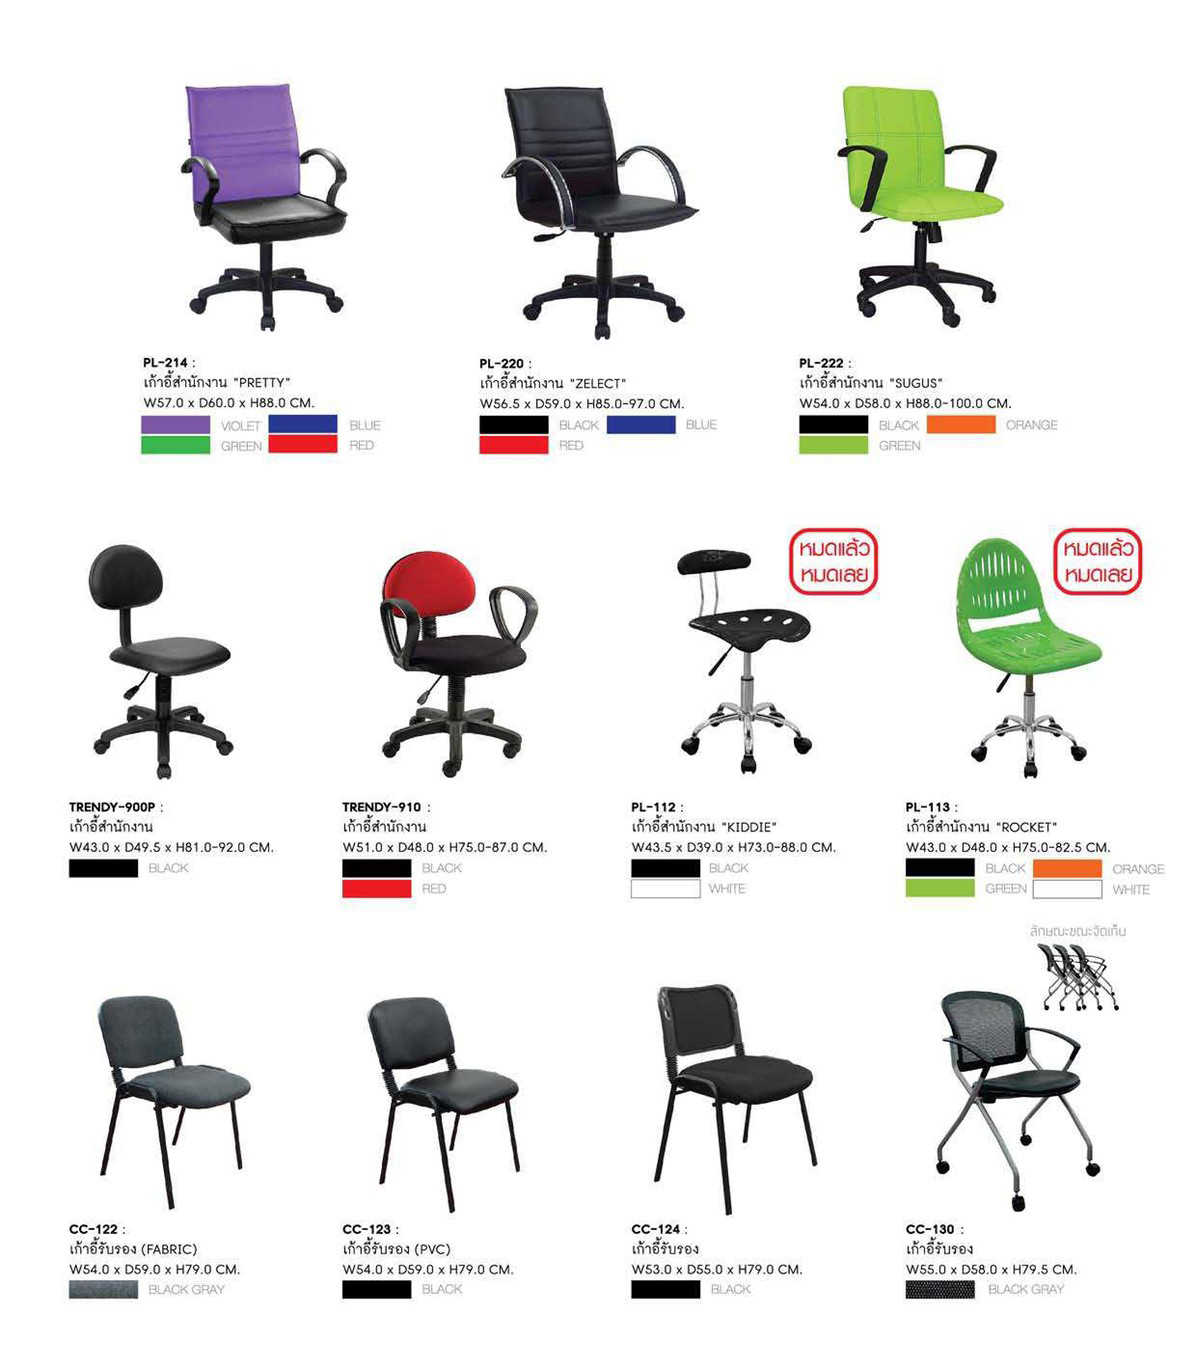 33029::TRENDY-910::A Sure office chair with fabric seat. Dimension (WxDxH) cm : 51x48x75-85. Available in Black and Red